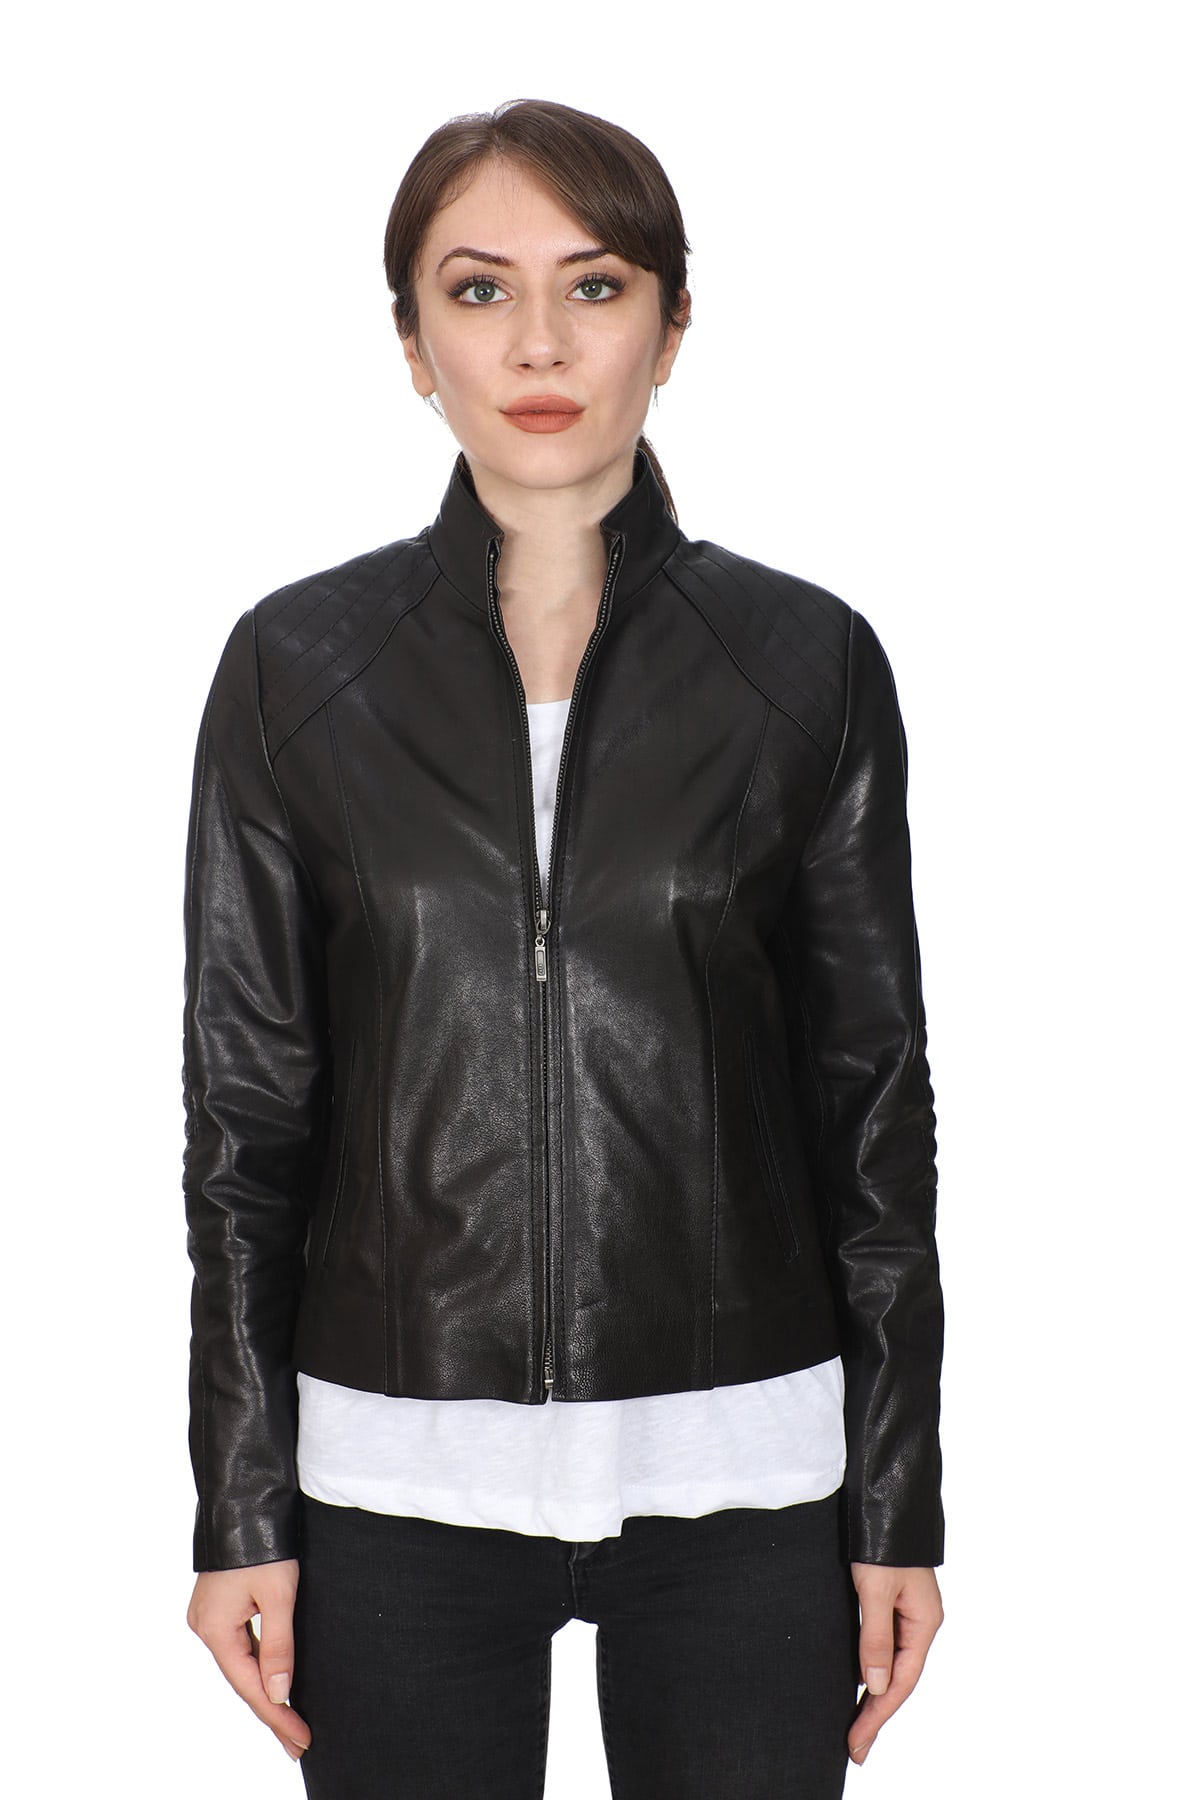 Women's 100 % Real Black Leather Biker Style Archie Jacket